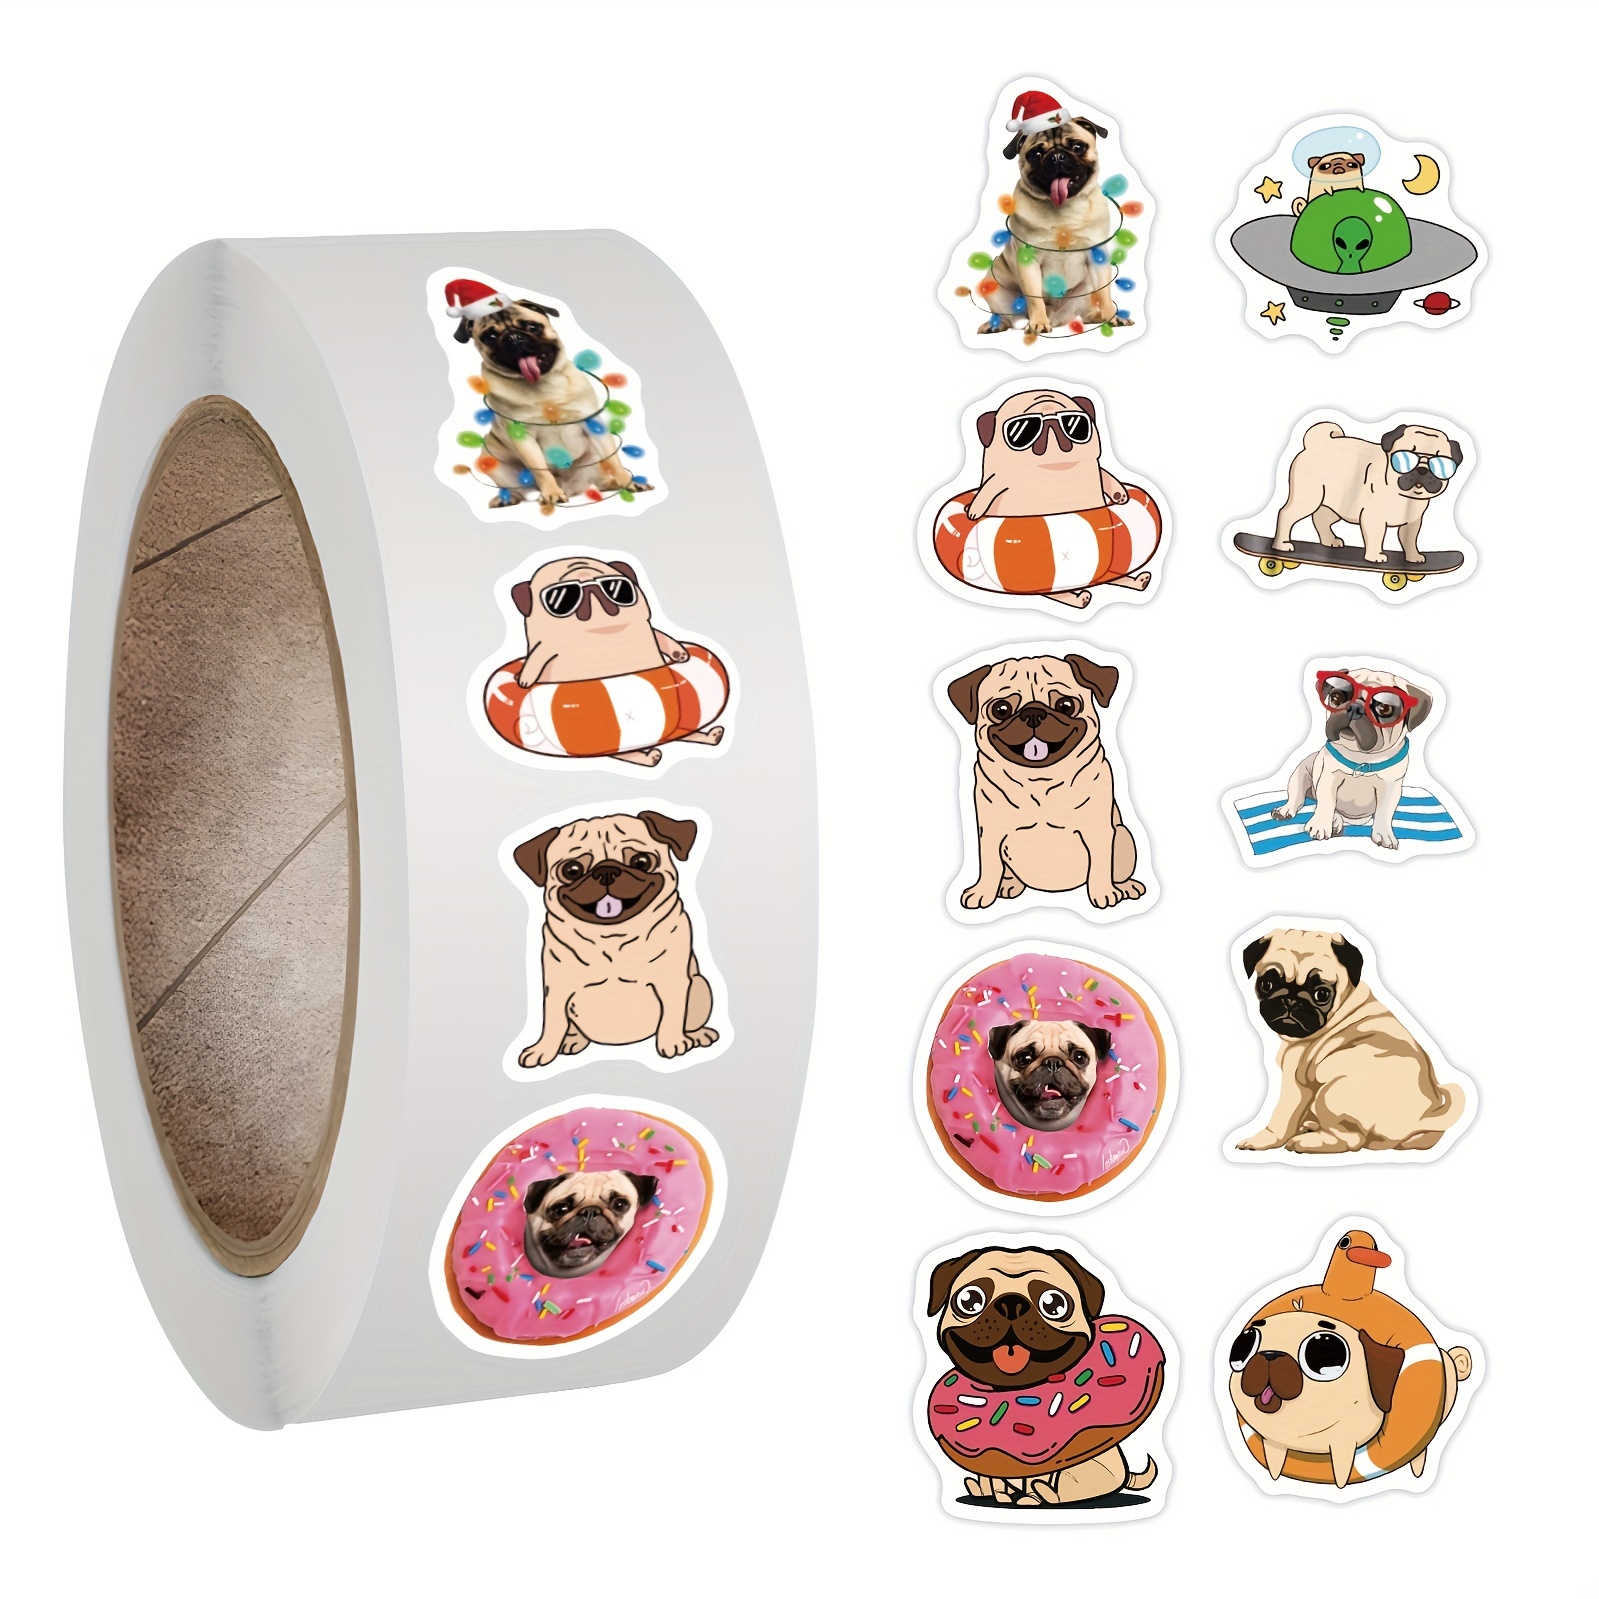 500Pcs Adorable Puppy Stickers - Colorful Dog Themed Decals for